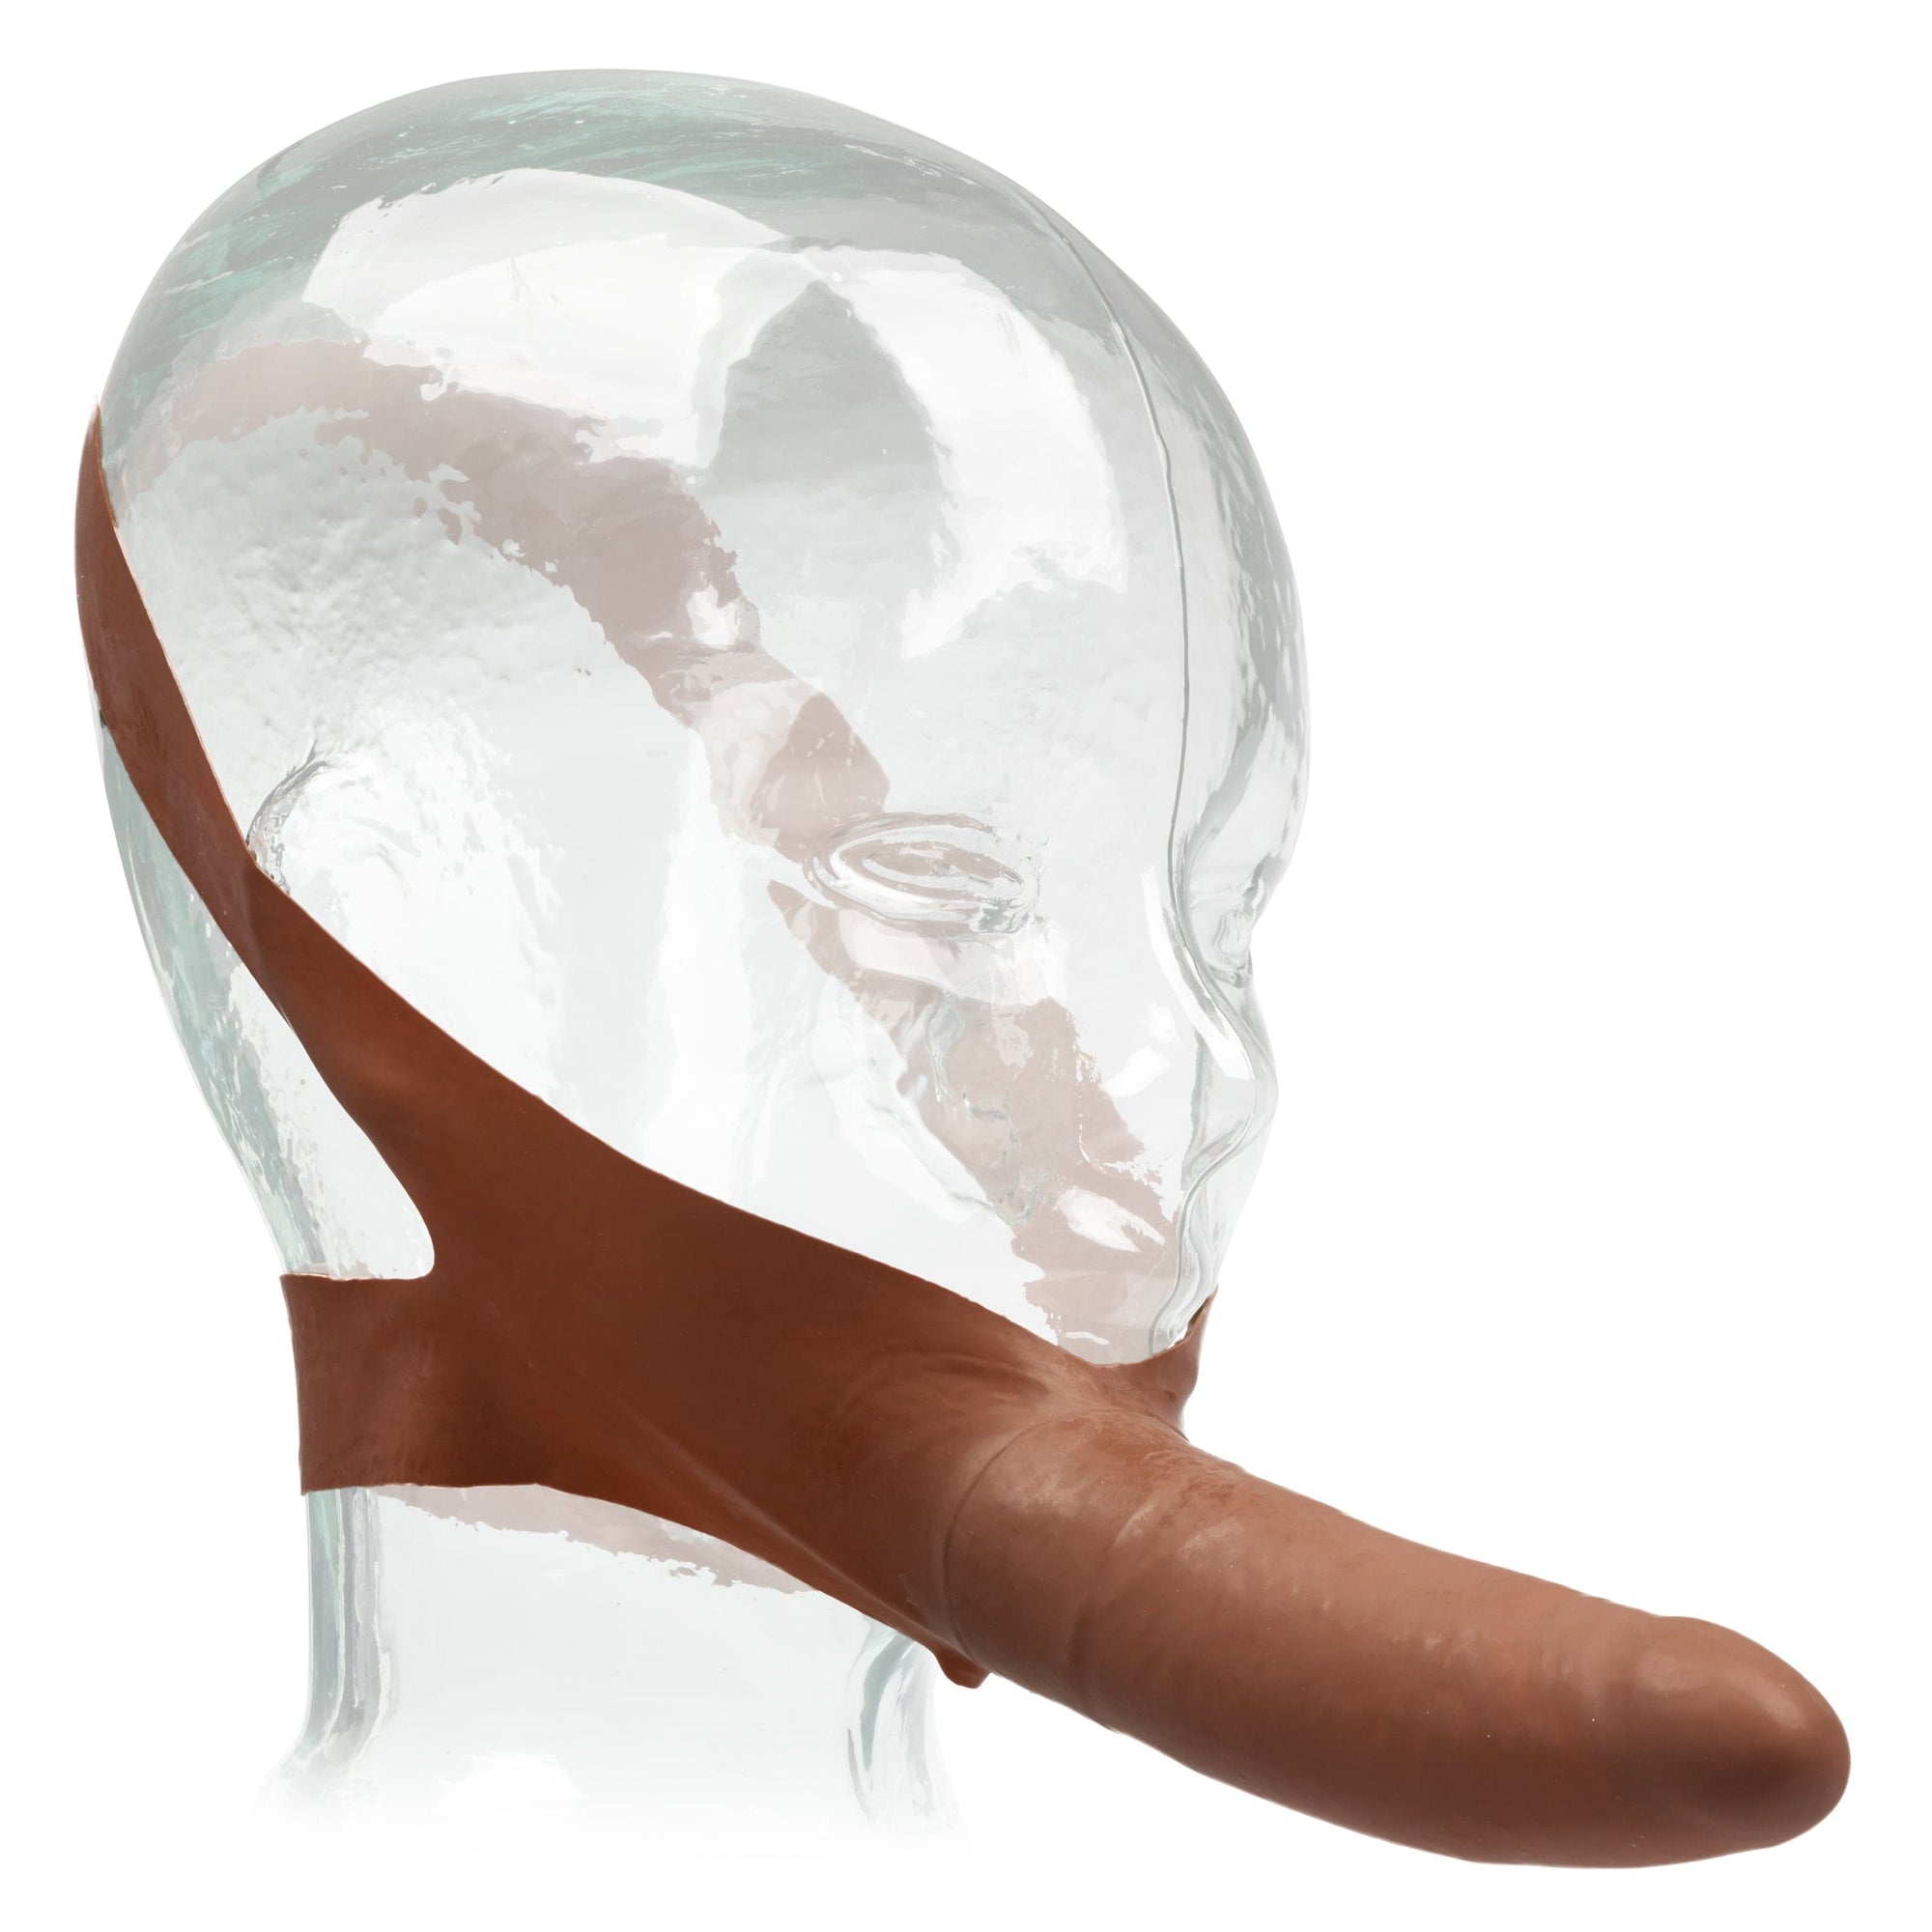 California Exotics - The Original Accommodator Latex Dong Mouth Strap On (Brown) Strap On with Non hollow Dildo for Female (Non Vibration) 716770101822 CherryAffairs